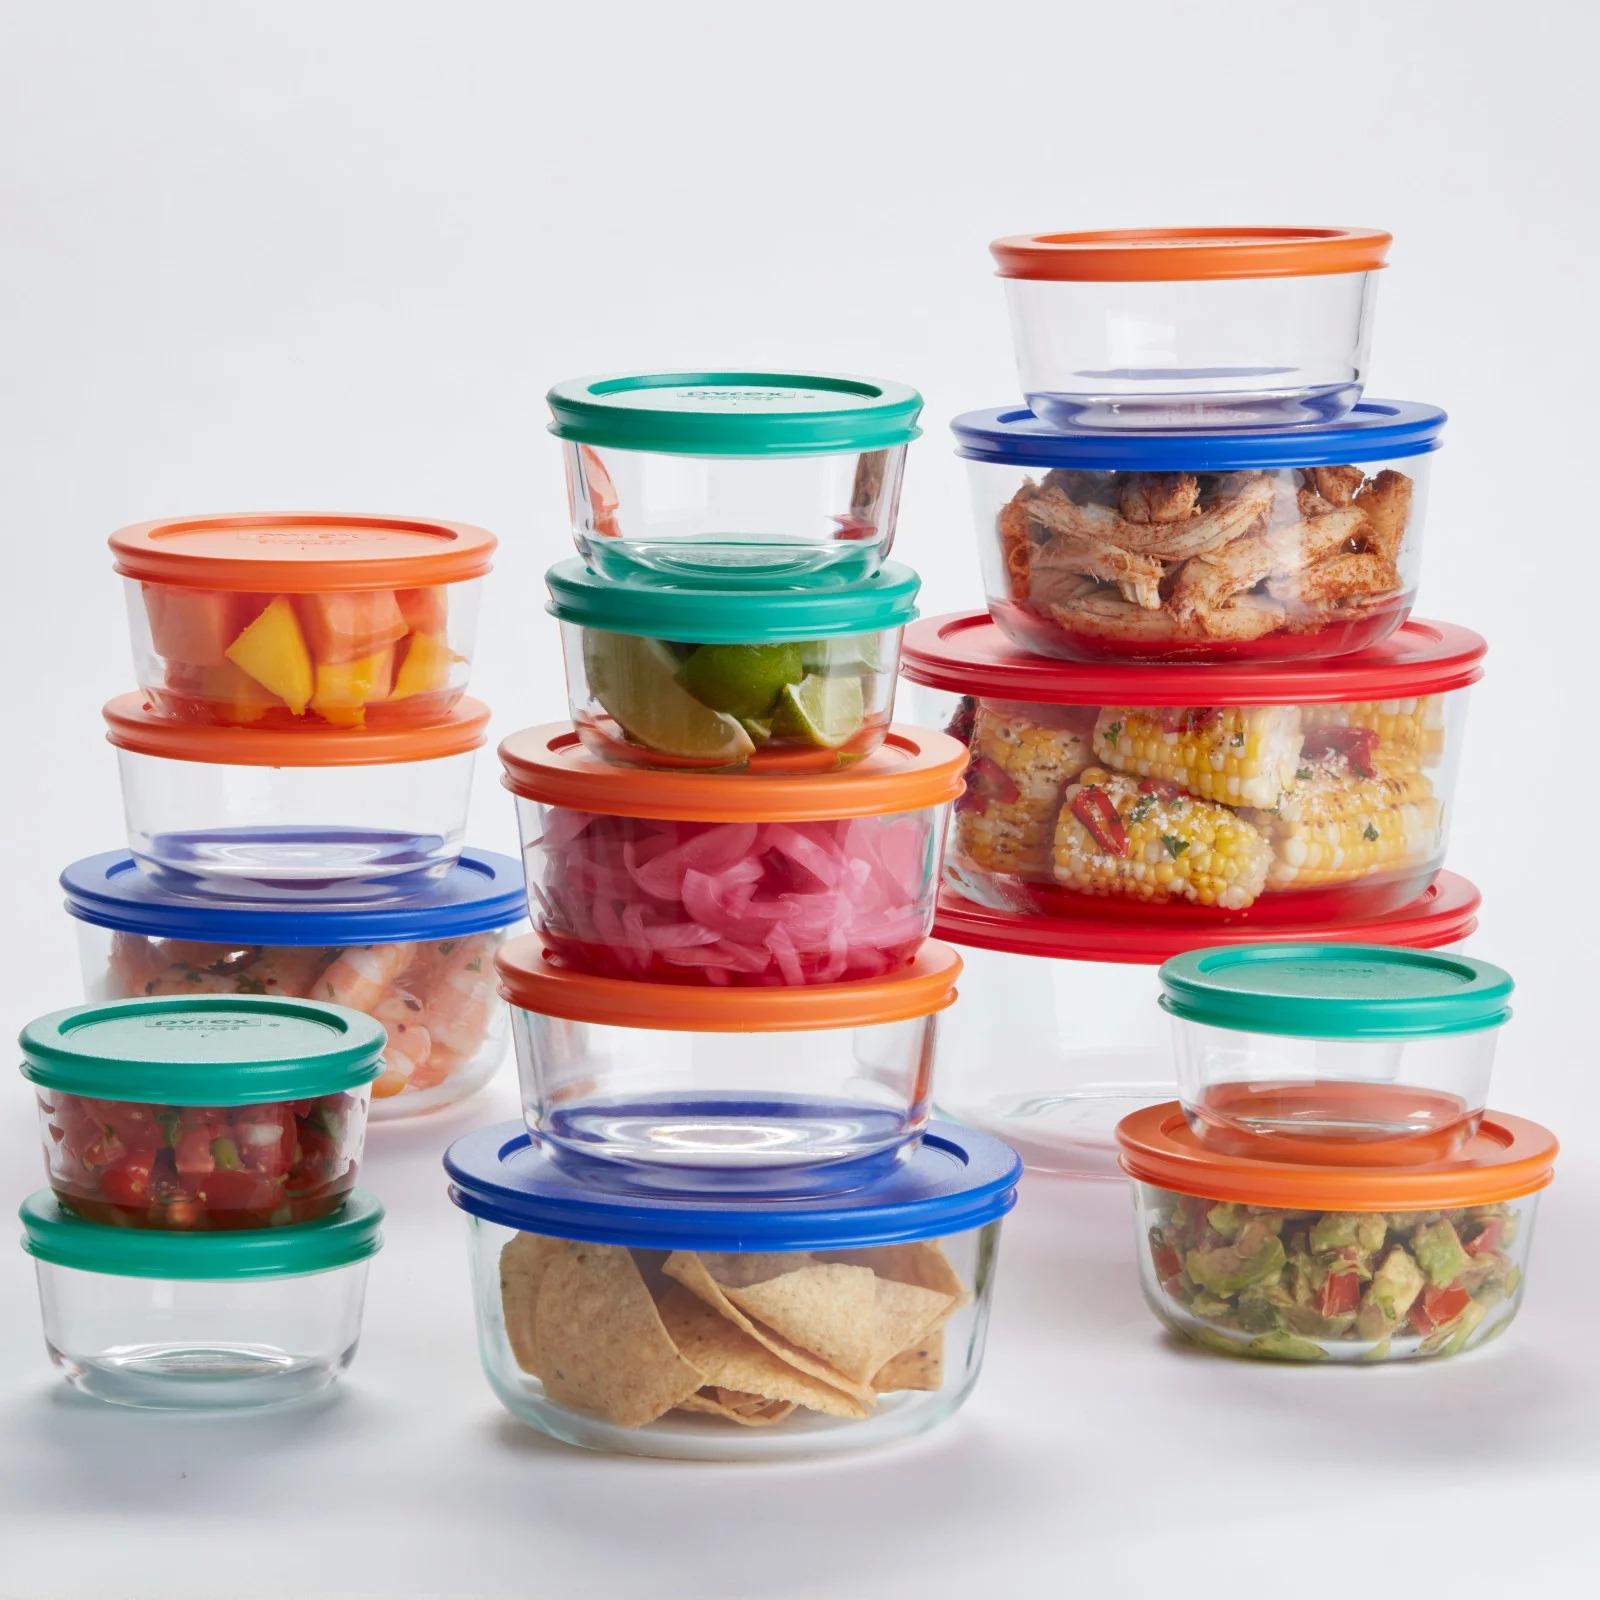 Pyrex Simply Store Glass Food Storage & Bake Container Set for $29.97